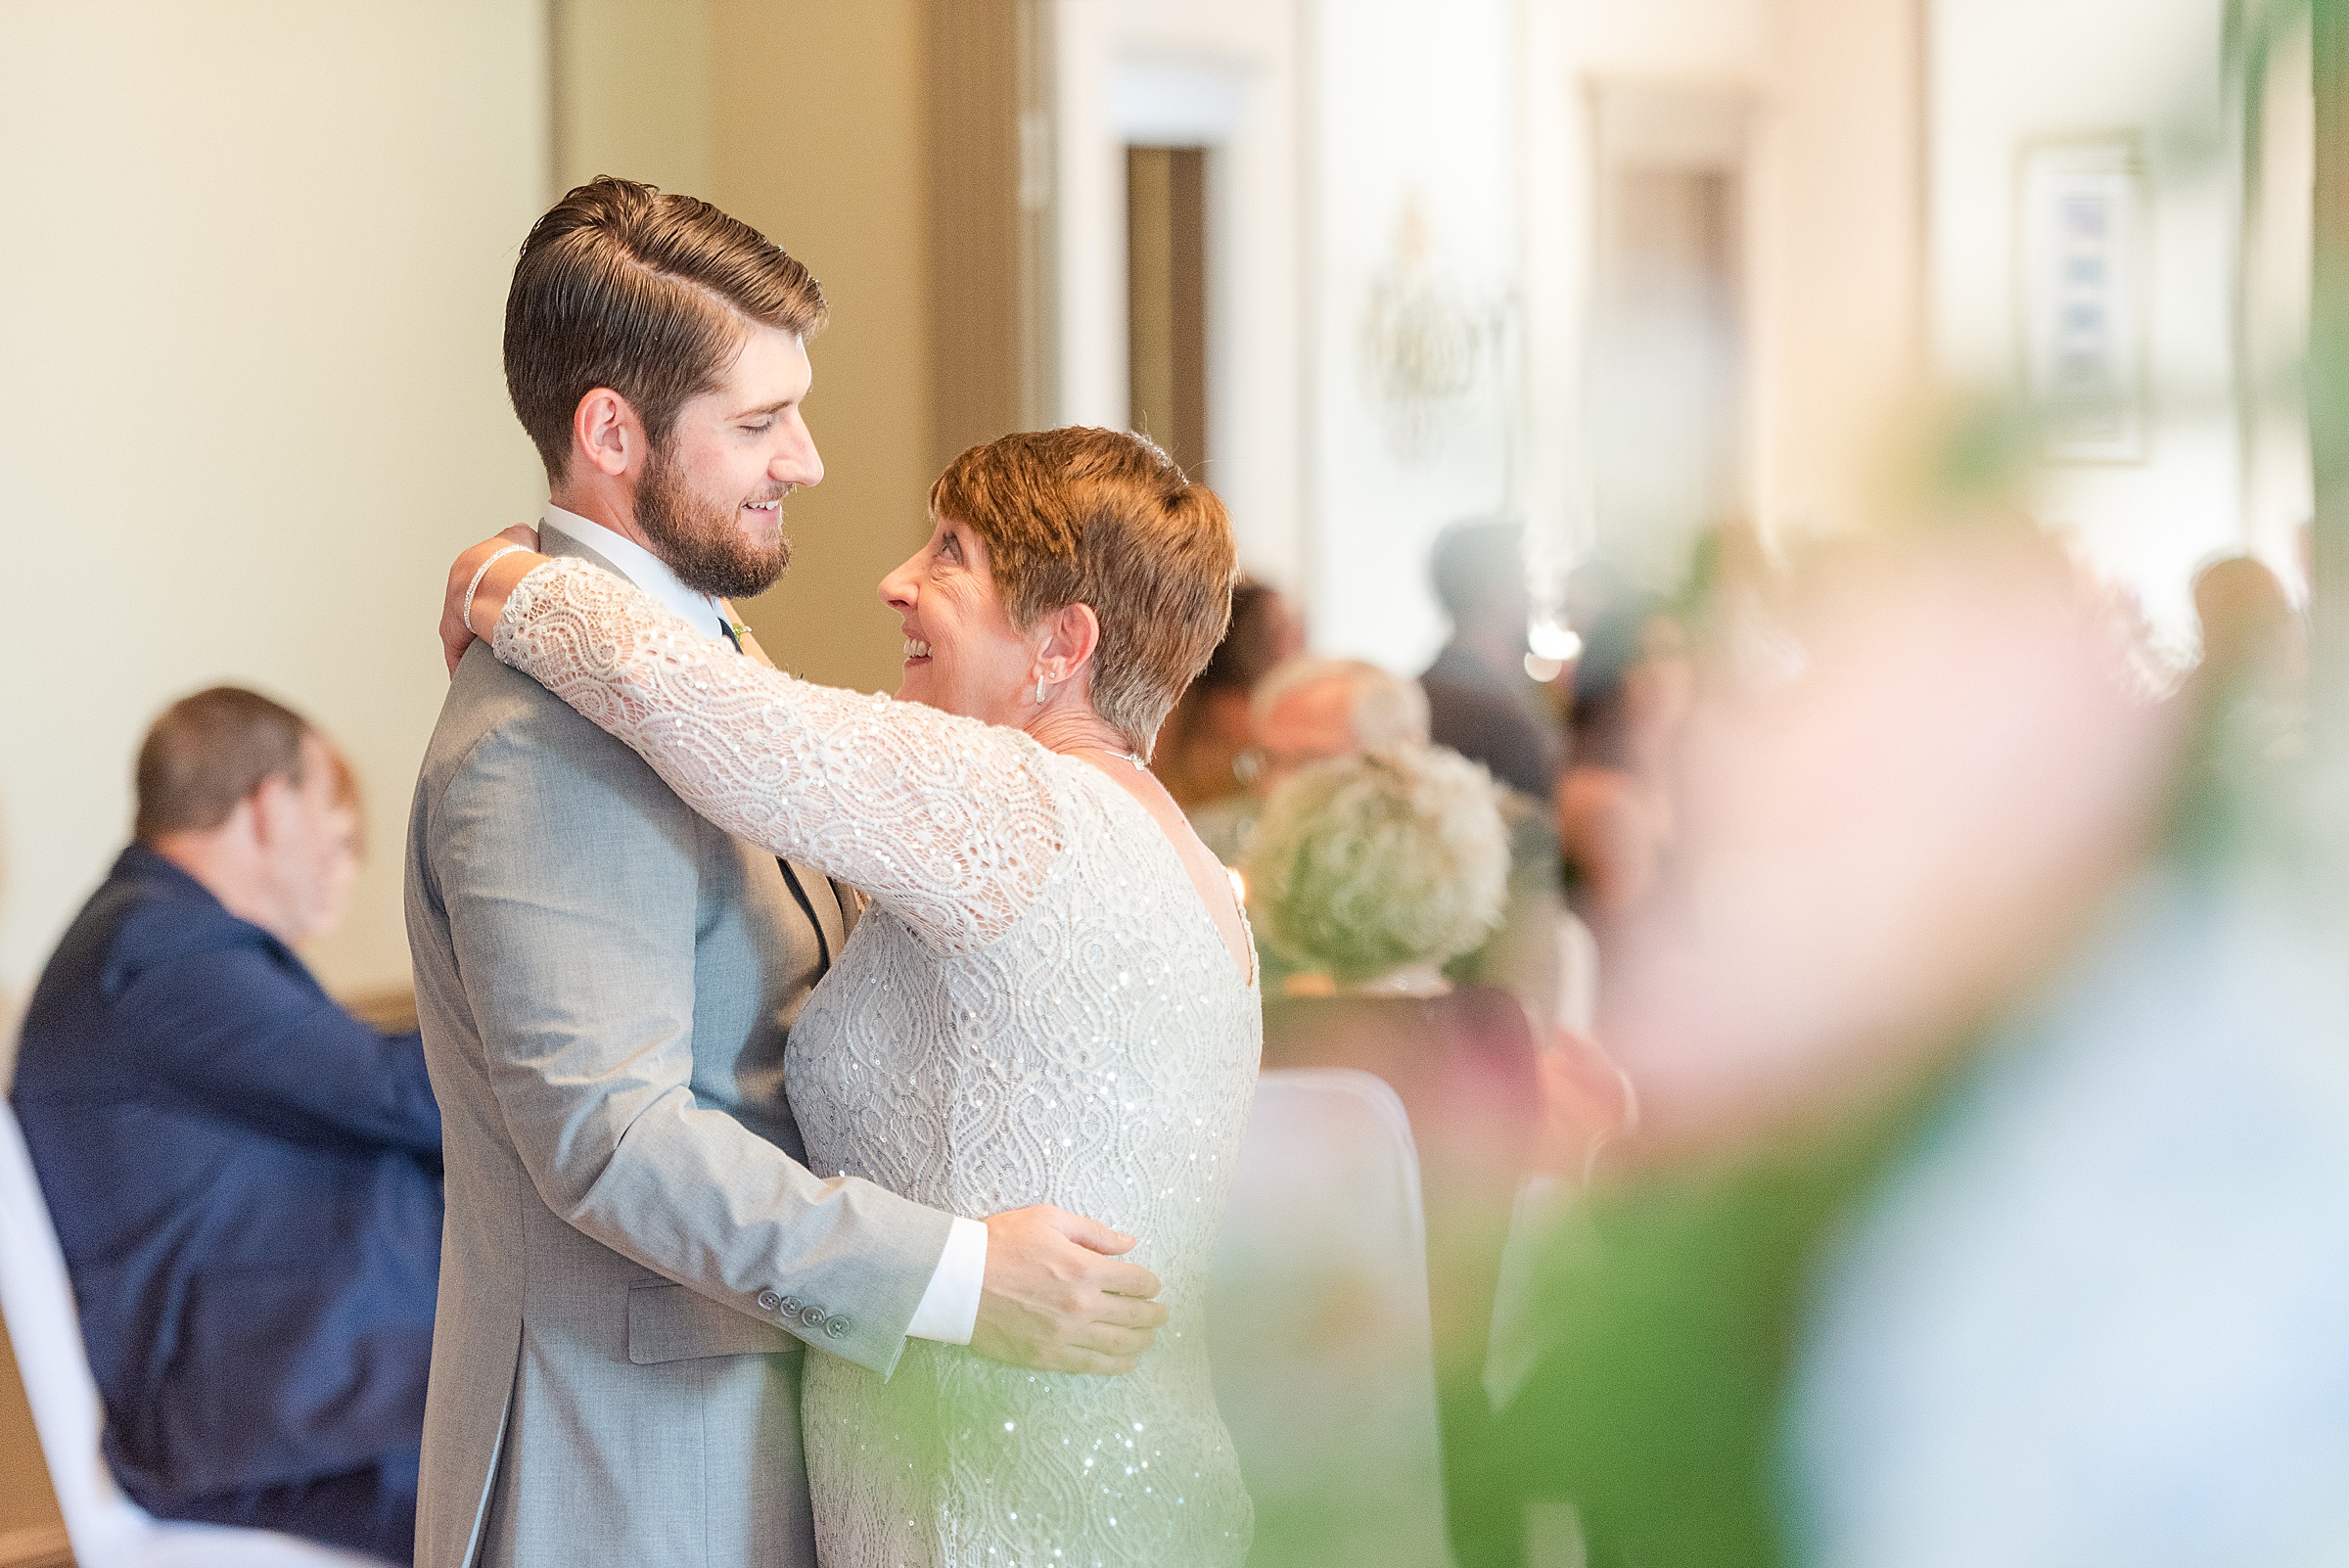 Mother Son Dance at Reception | Anderson Country Club Wedding, Indiana